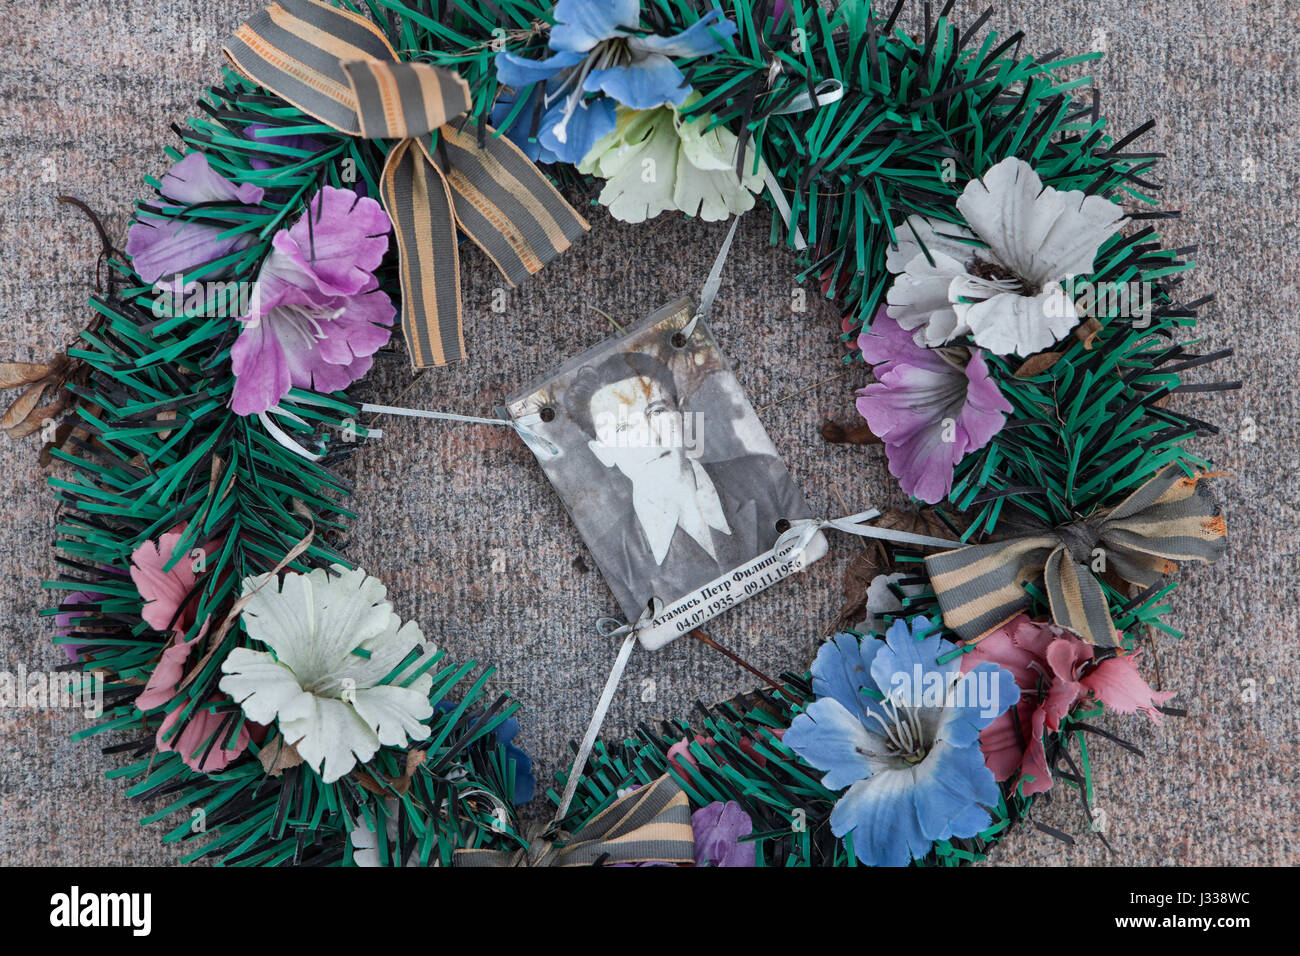 Wreath with a photograph of Soviet soldier Pyotr Atamas fallen during the Hungarian Uprising (1956) on his grave on the Soviet War Memorial at the Kerepesi Cemetery in Budapest, Hungary. Soviet soldier Pyotr Atamas was born on July 4, 1935 in Blagodatnoe (now in Stavropol Krai, Russia), and died in Budapest at age 21 on November 9, 1956. His grave on the Kerepesi Cemetery was unmarked until the last restoration works conducted in 2013-2015. Stock Photo